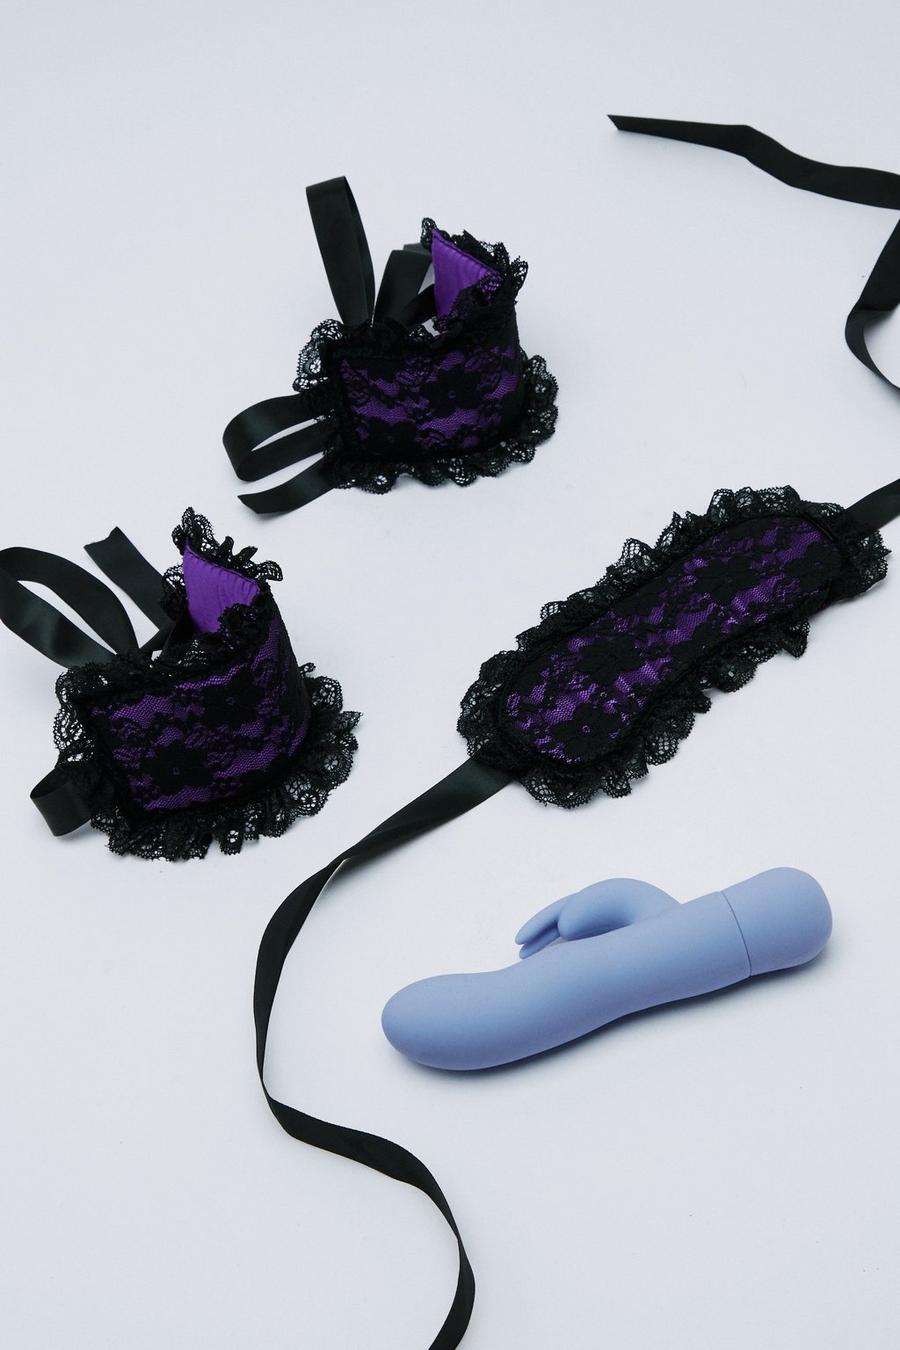 Rabbit Dildo With Handcuffs And Blindfold Set